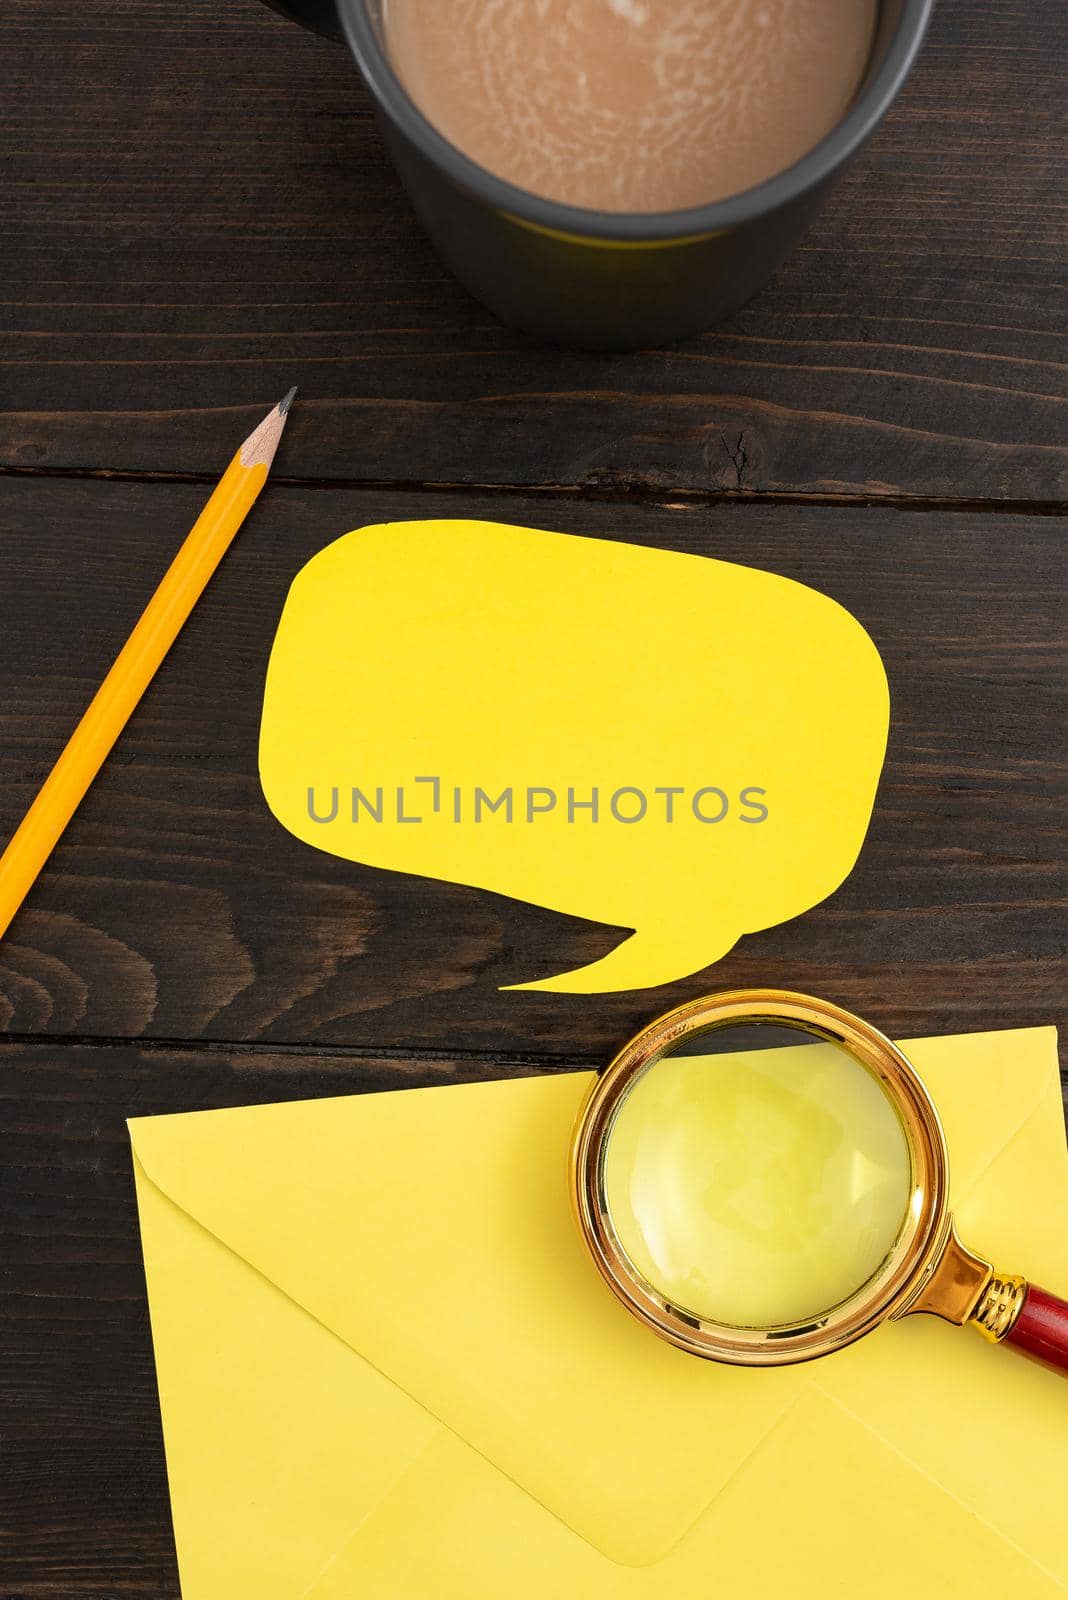 Thought Bubble Paper With Envelope, Coffee Cup And Stationery On Wooden Background. Business Strategies With Drink On Table. It Is Showing Crucial And Important News. by nialowwa